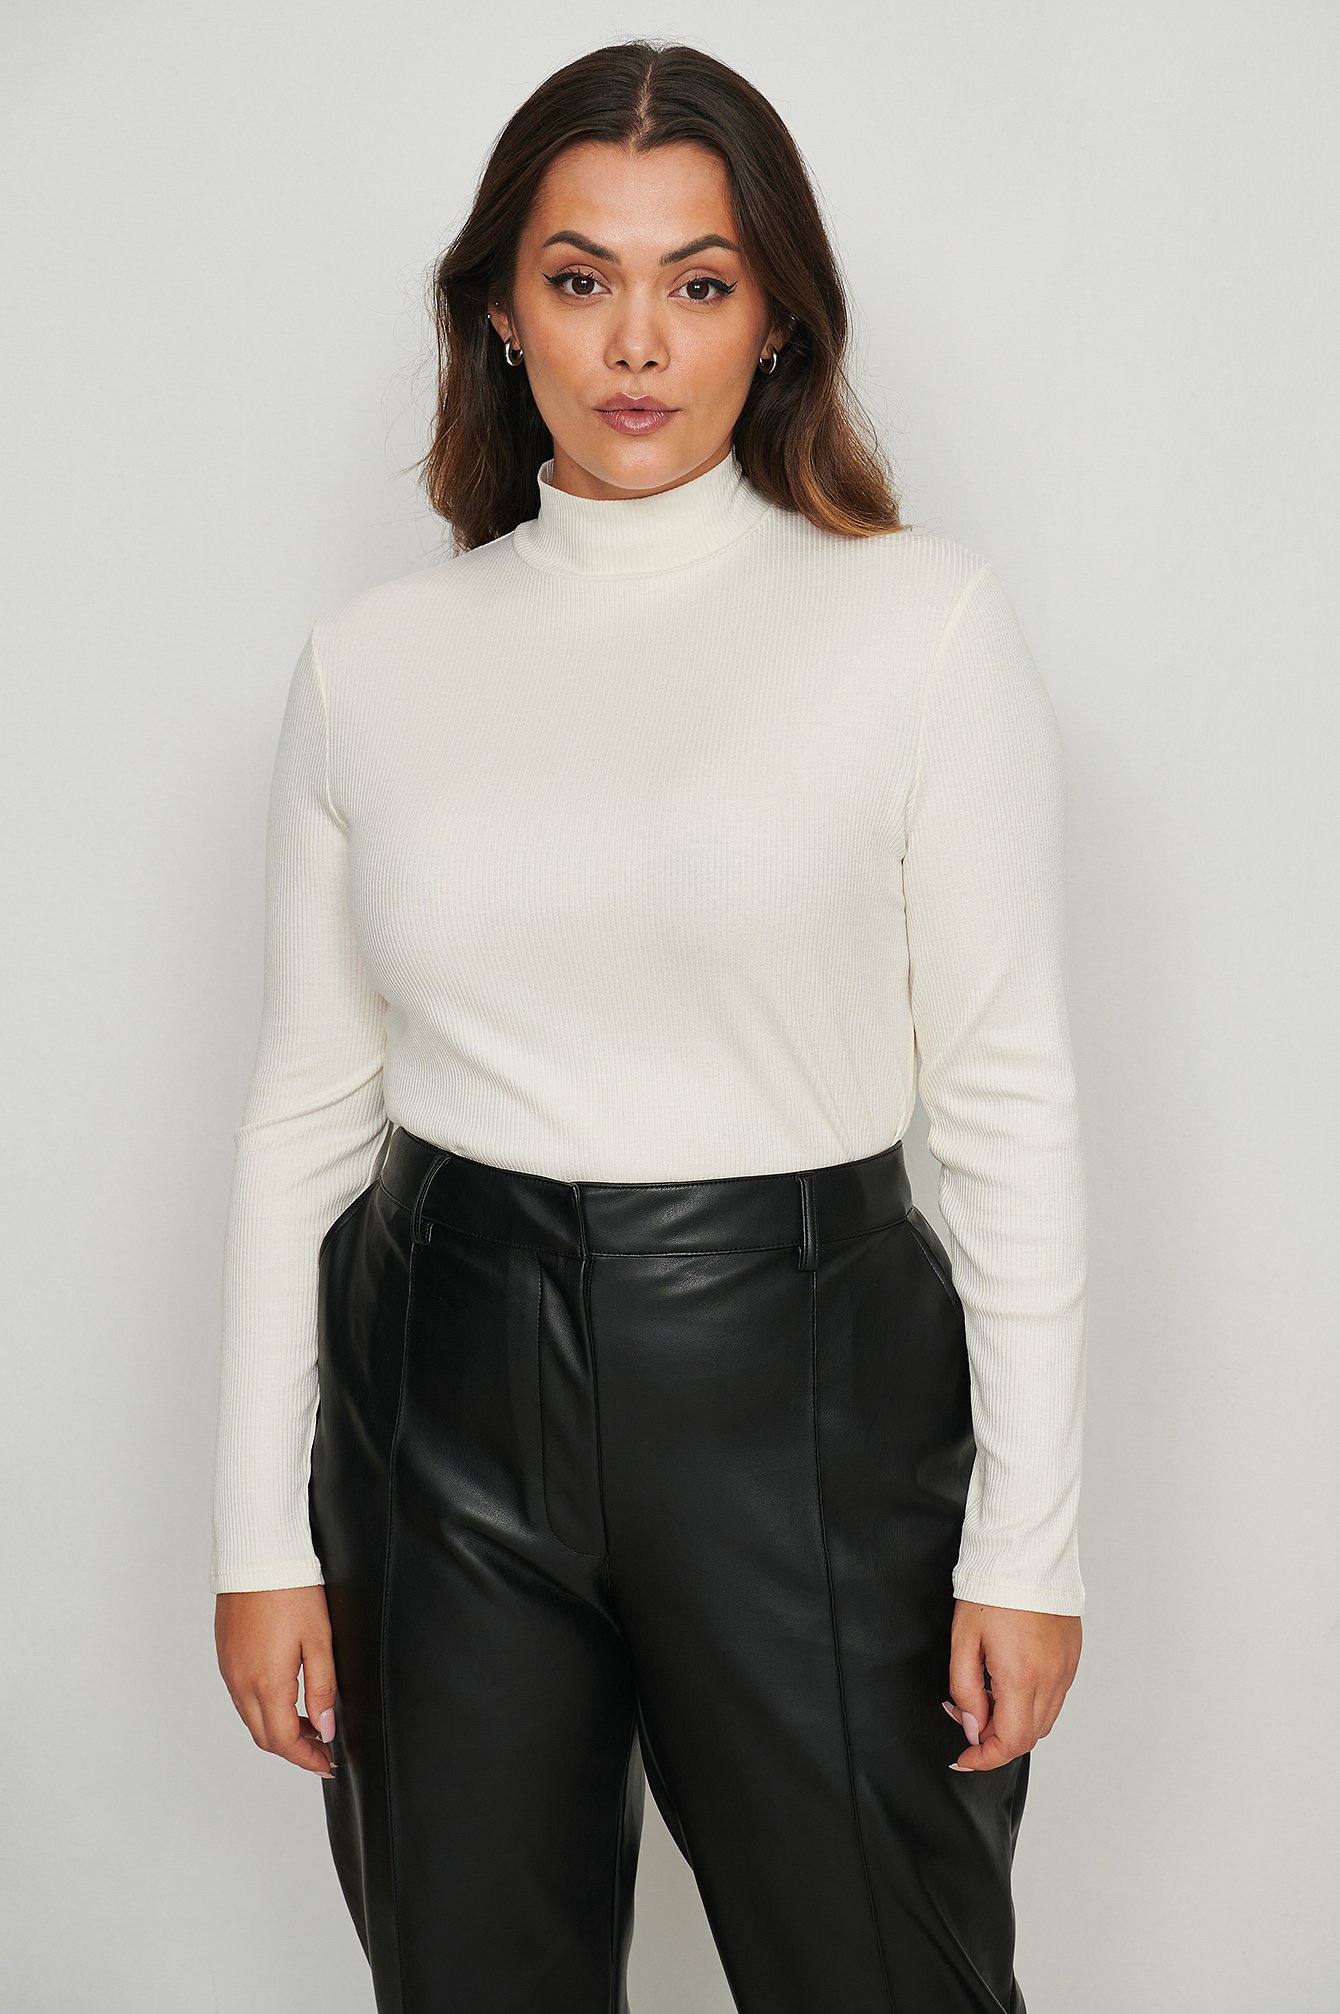 Offwhite Ribbed Long Sleeved Turtle Neck Sweater